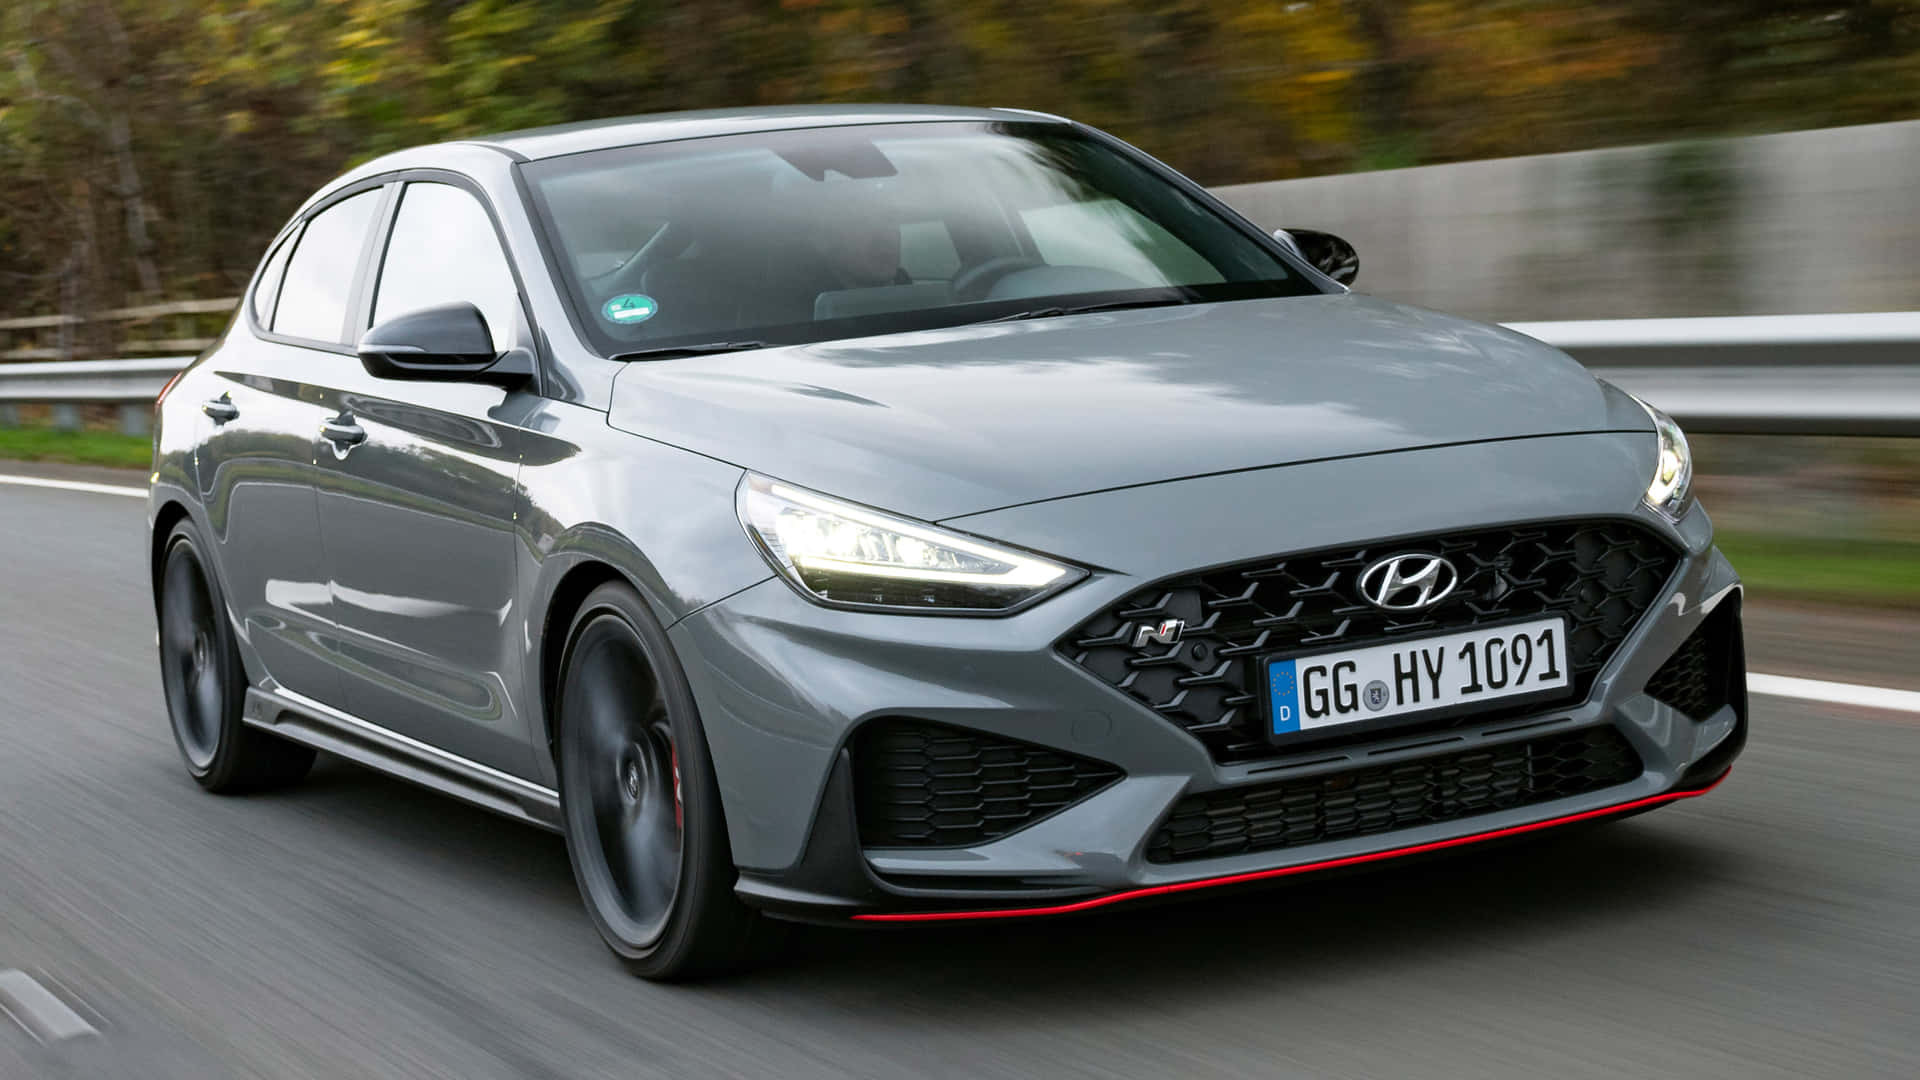 Get Ready to Take the Road by Storm with the Hyundai